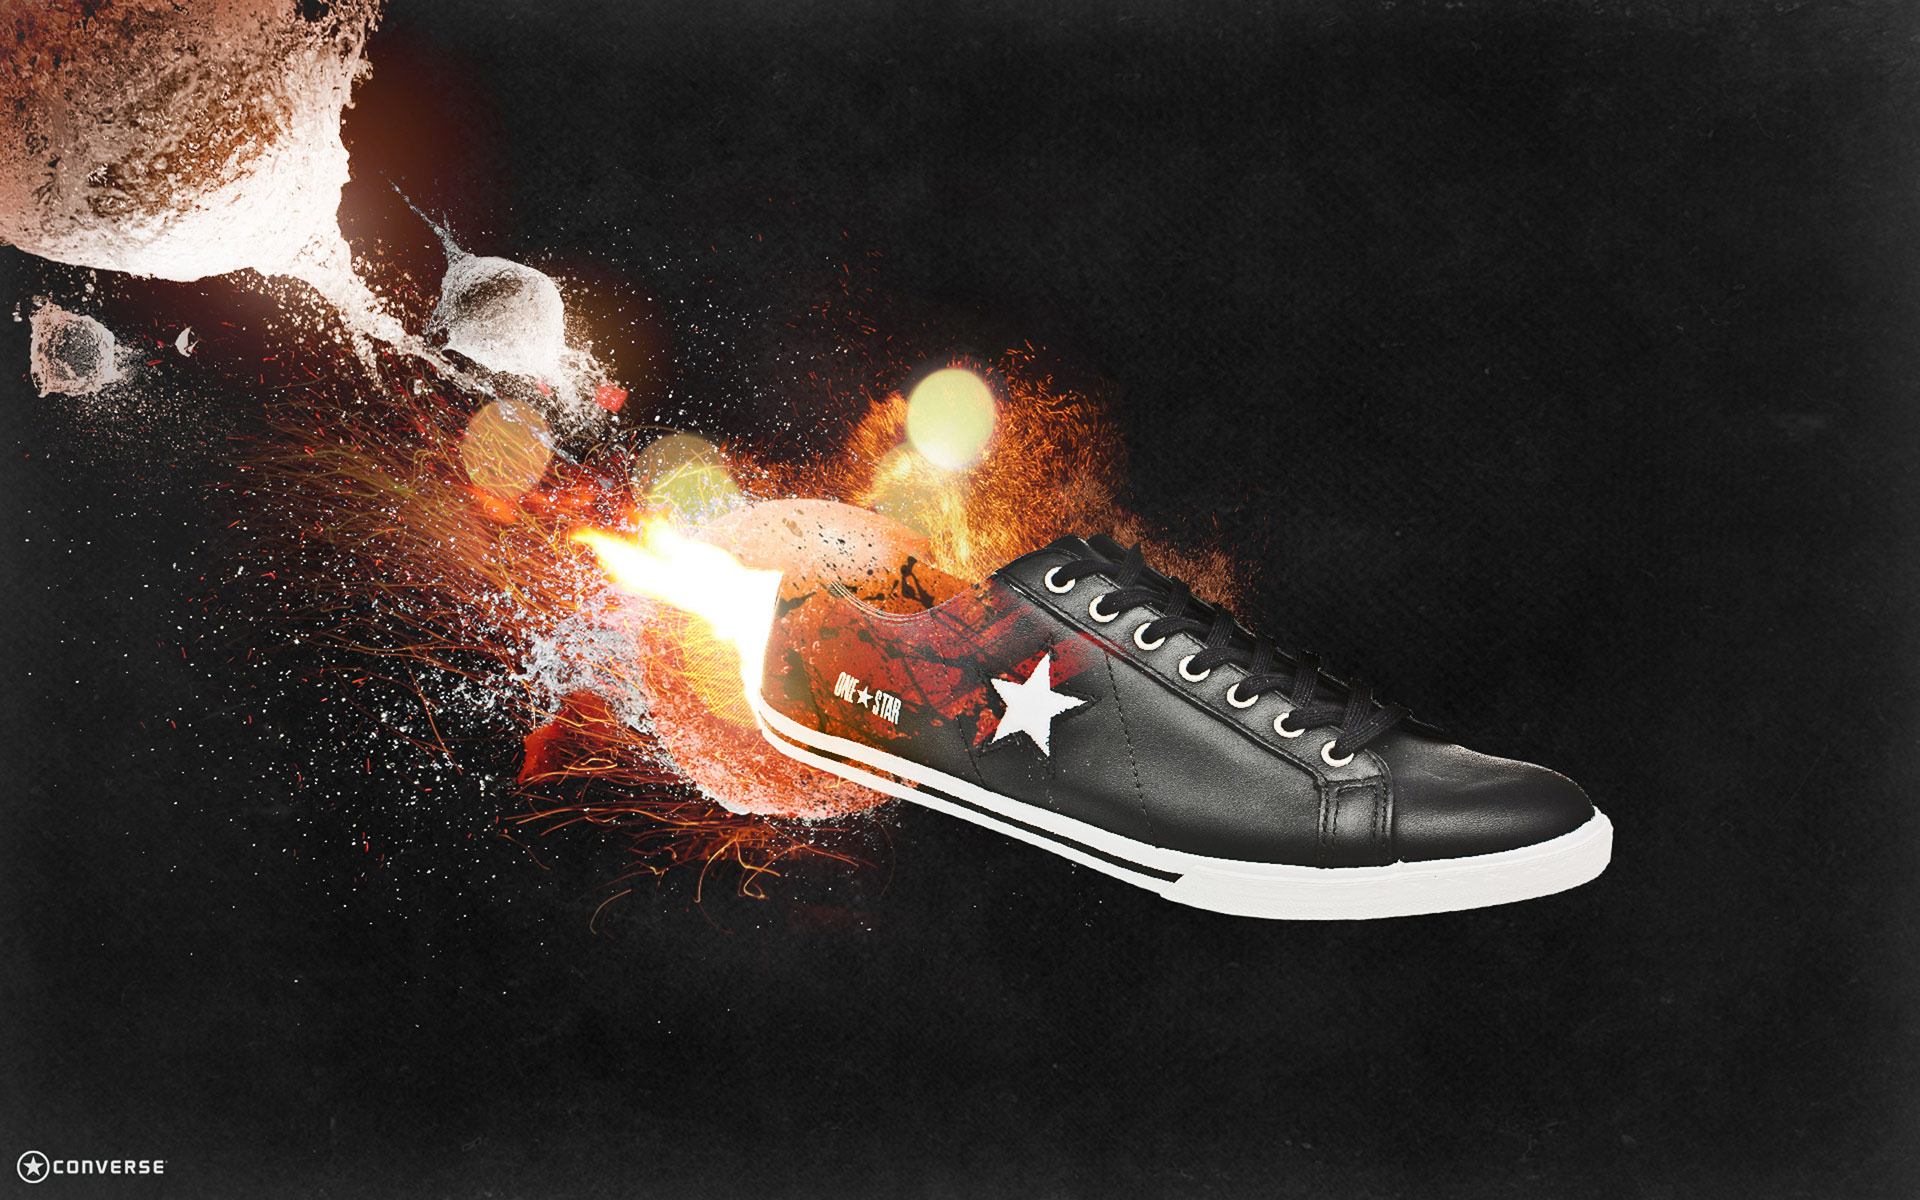 Converse HD Wallpaper Background Image Id